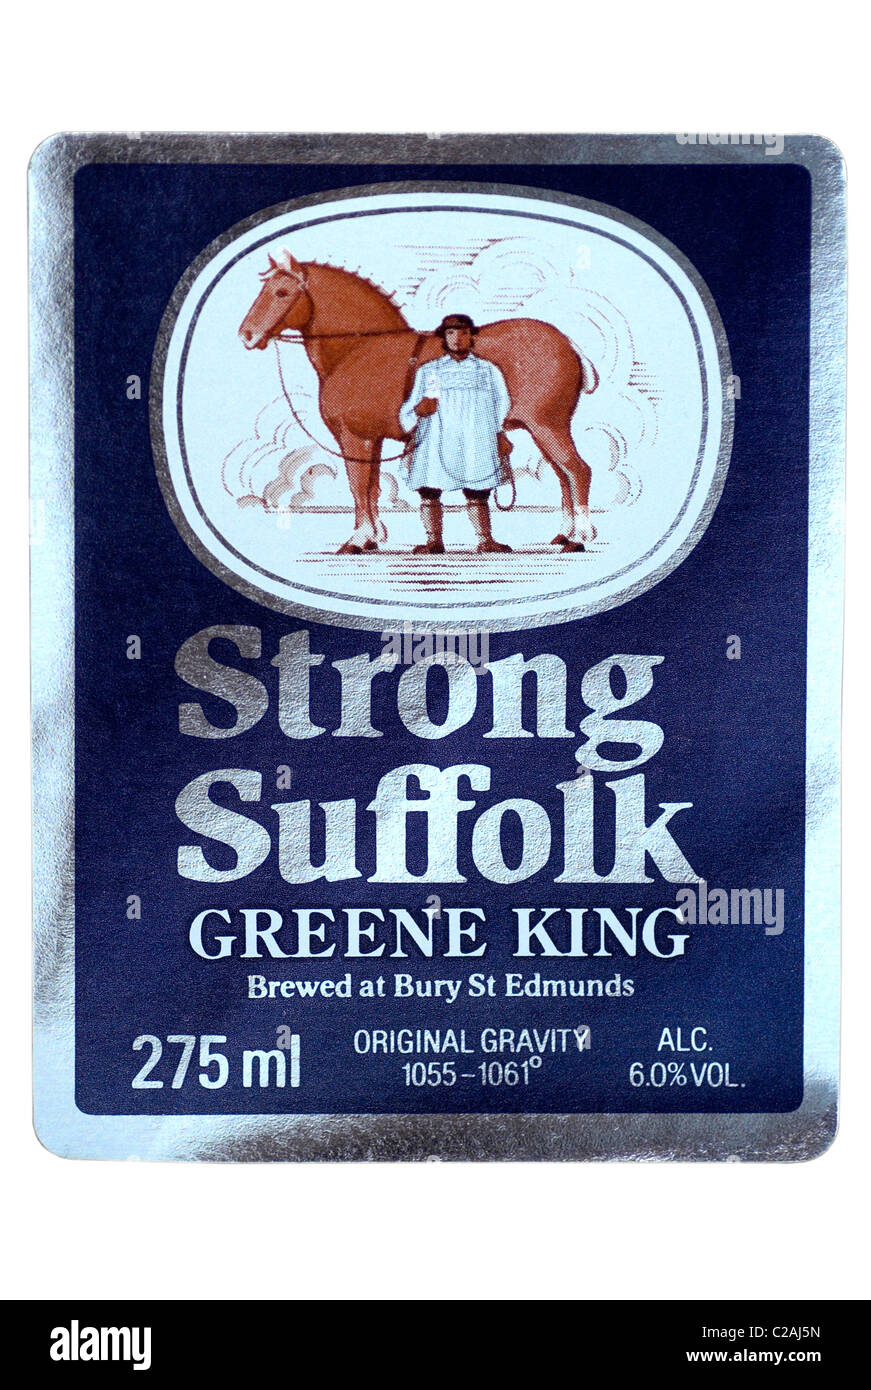 Greene King Strong Suffolk Ale bottle label - date unknown. Stock Photo